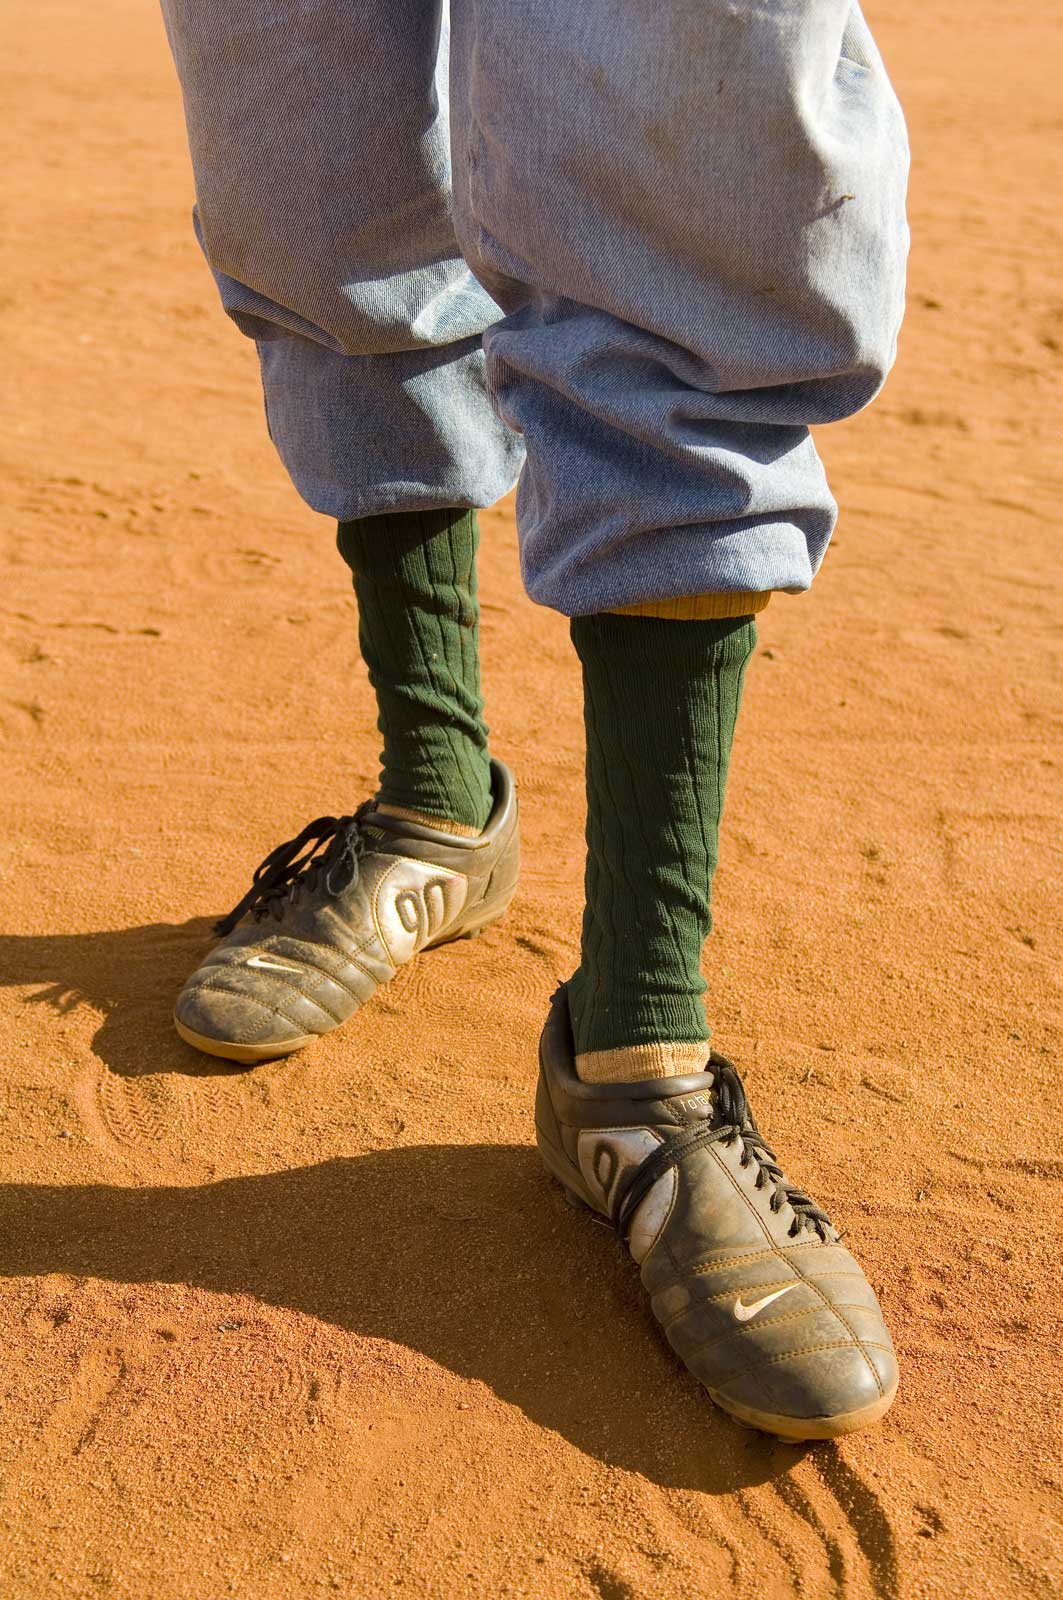 image of AARONTAIT-COPYRIGHTED-2014-5332 EDITORIAL DOCUMENTARY PHOTOGRAPHER PAPUNYA NORTHERN TERRITORY AUSTRALIA LANDSCAPE LIFE PEOPLE ART INDIGENOUS PINTUPI LURITJA PAPUNYA TULA FOOTY BOOTS AUSTRALIA OUTBACK